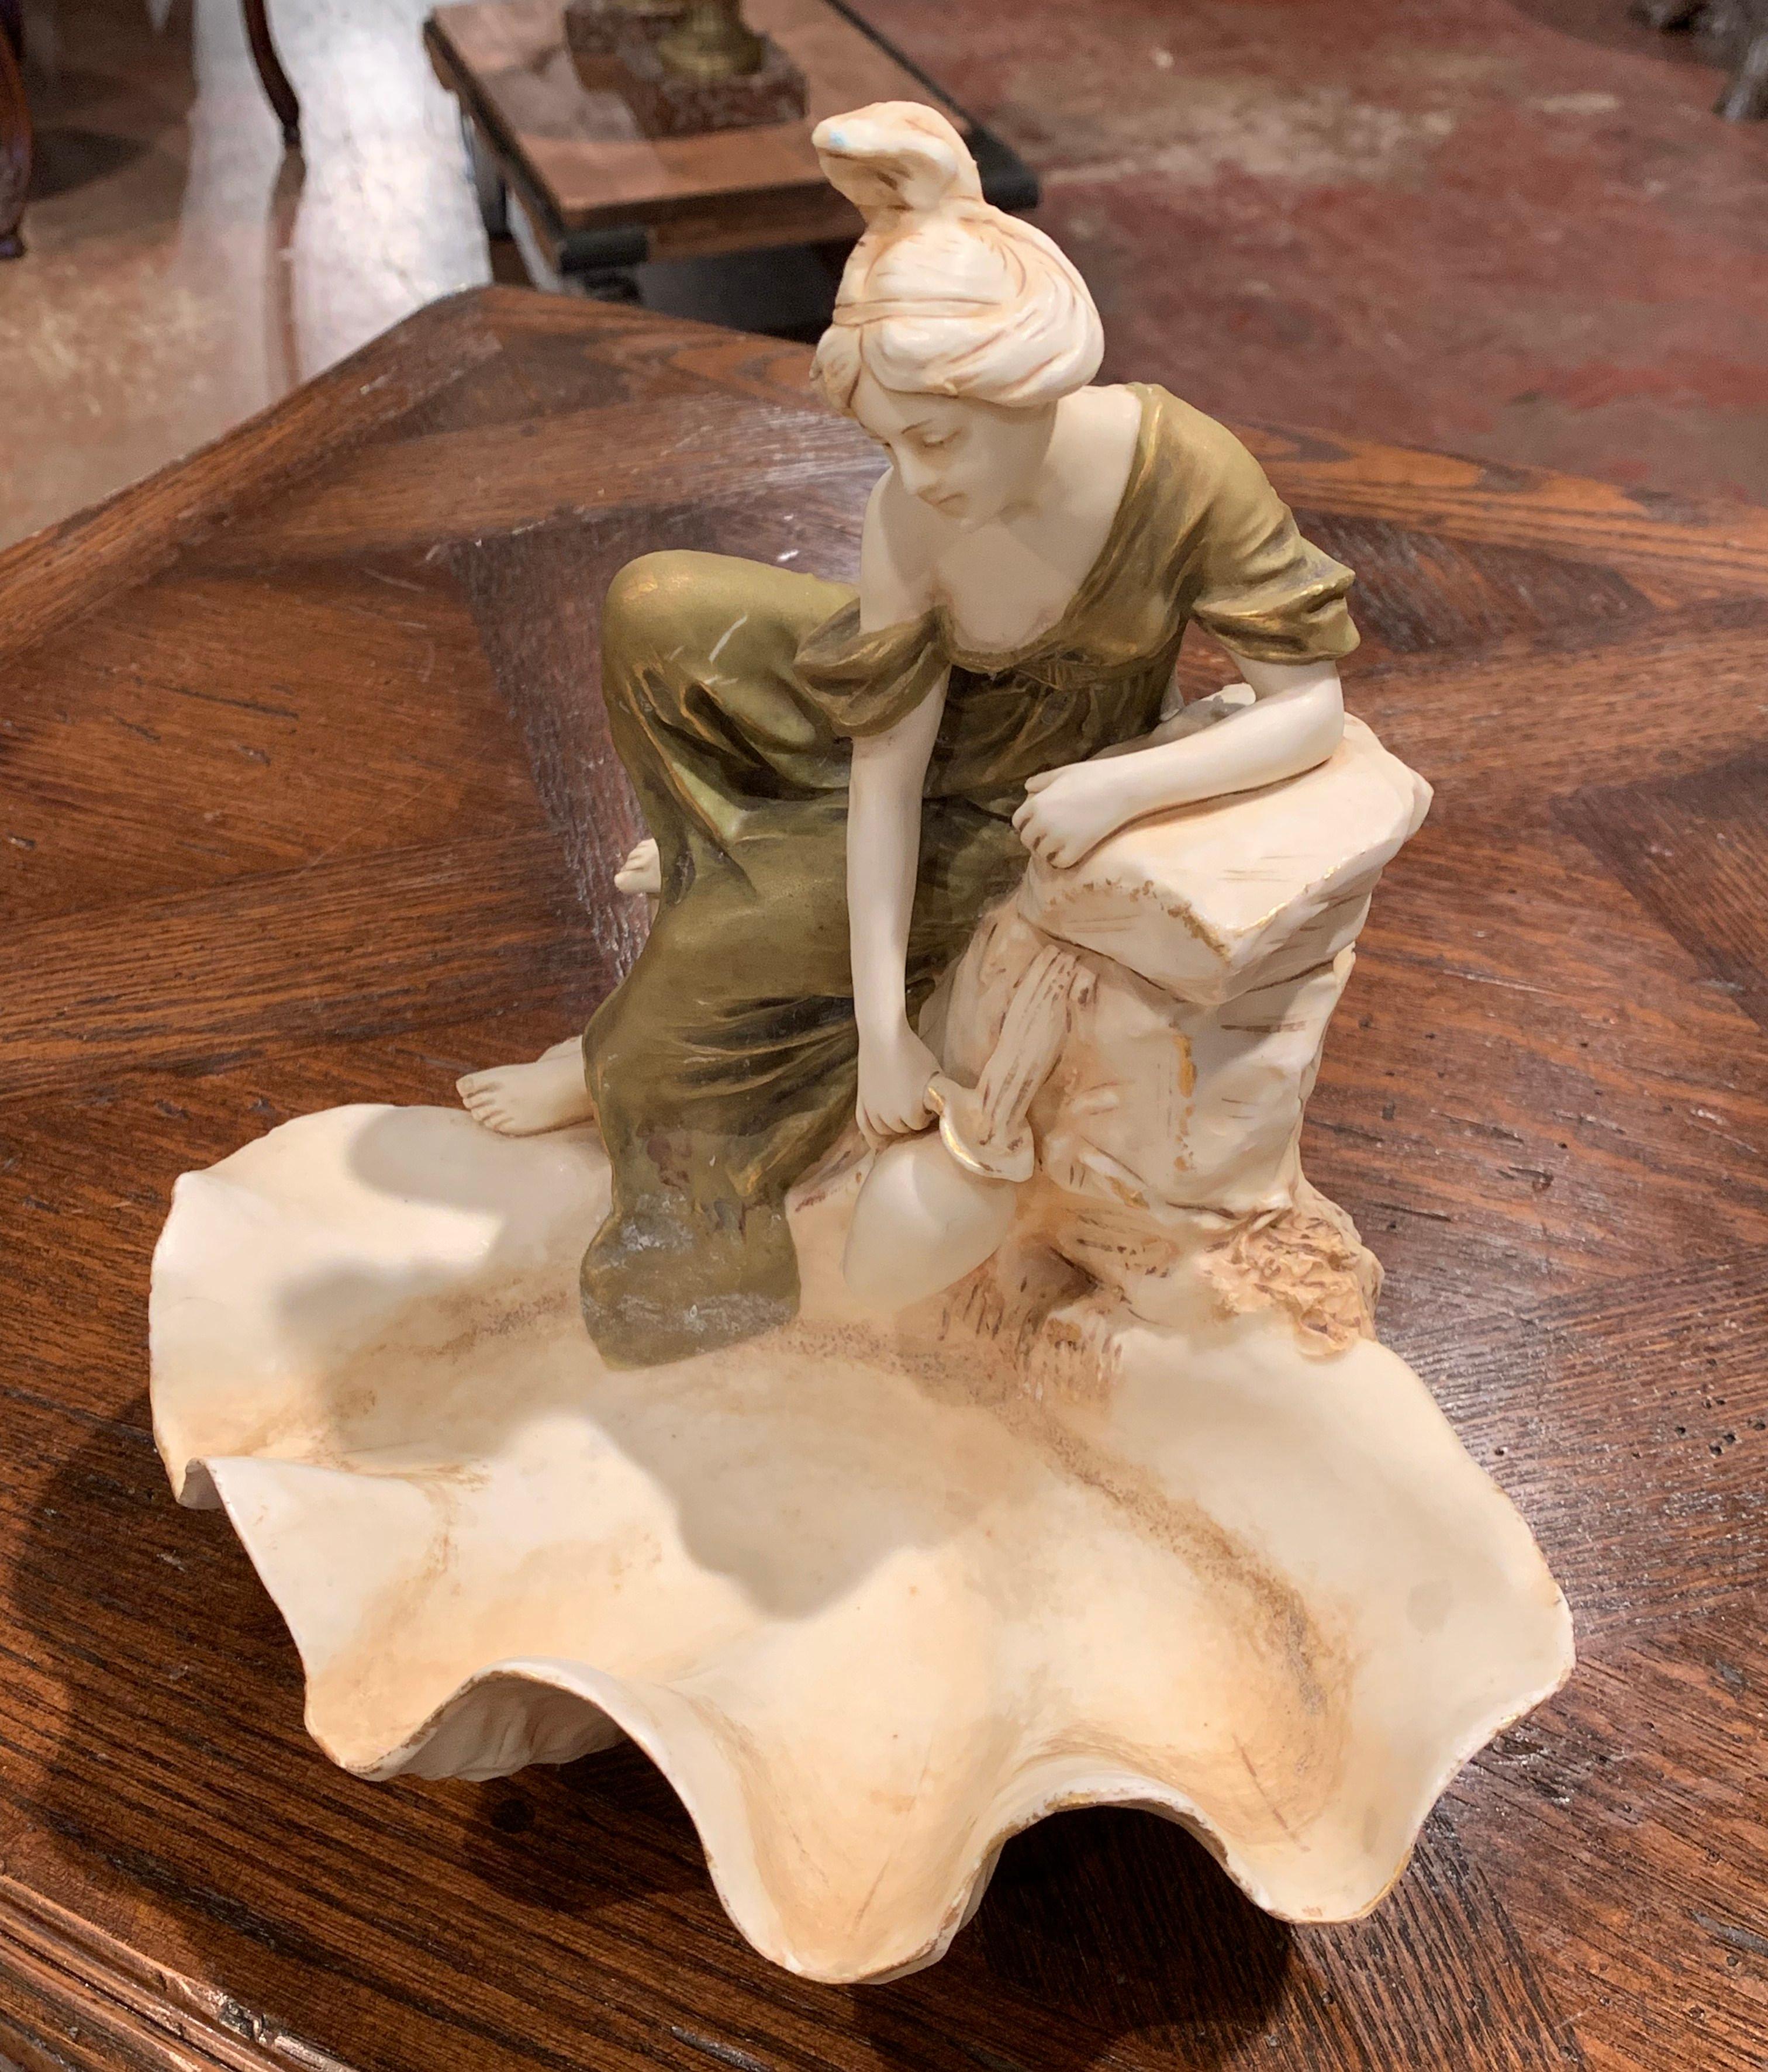 Crafted in the Czech Republic circa 1930, the Art Deco sculpture features a woman statue sited on the edge of a basin and filling up her water jug. The carved dish composition is in excellent condition, with a rich patinated finish, and stamped on